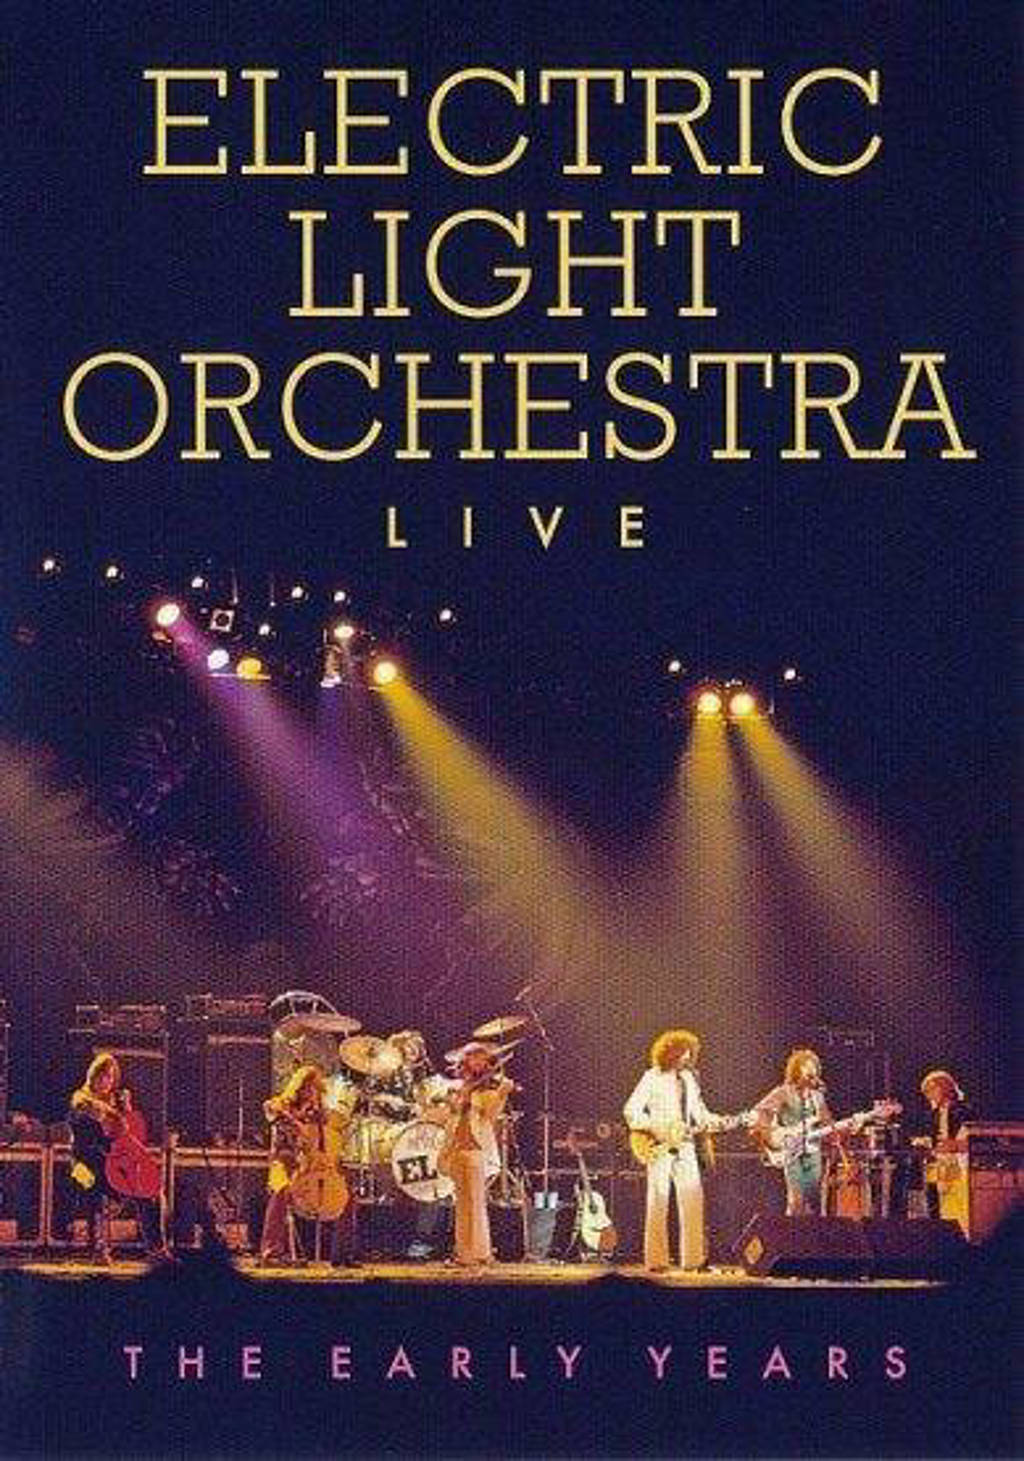 stof in de ogen gooien verkenner Christian Electric Light Orchestra - Live: The Early Years (DVD) | wehkamp